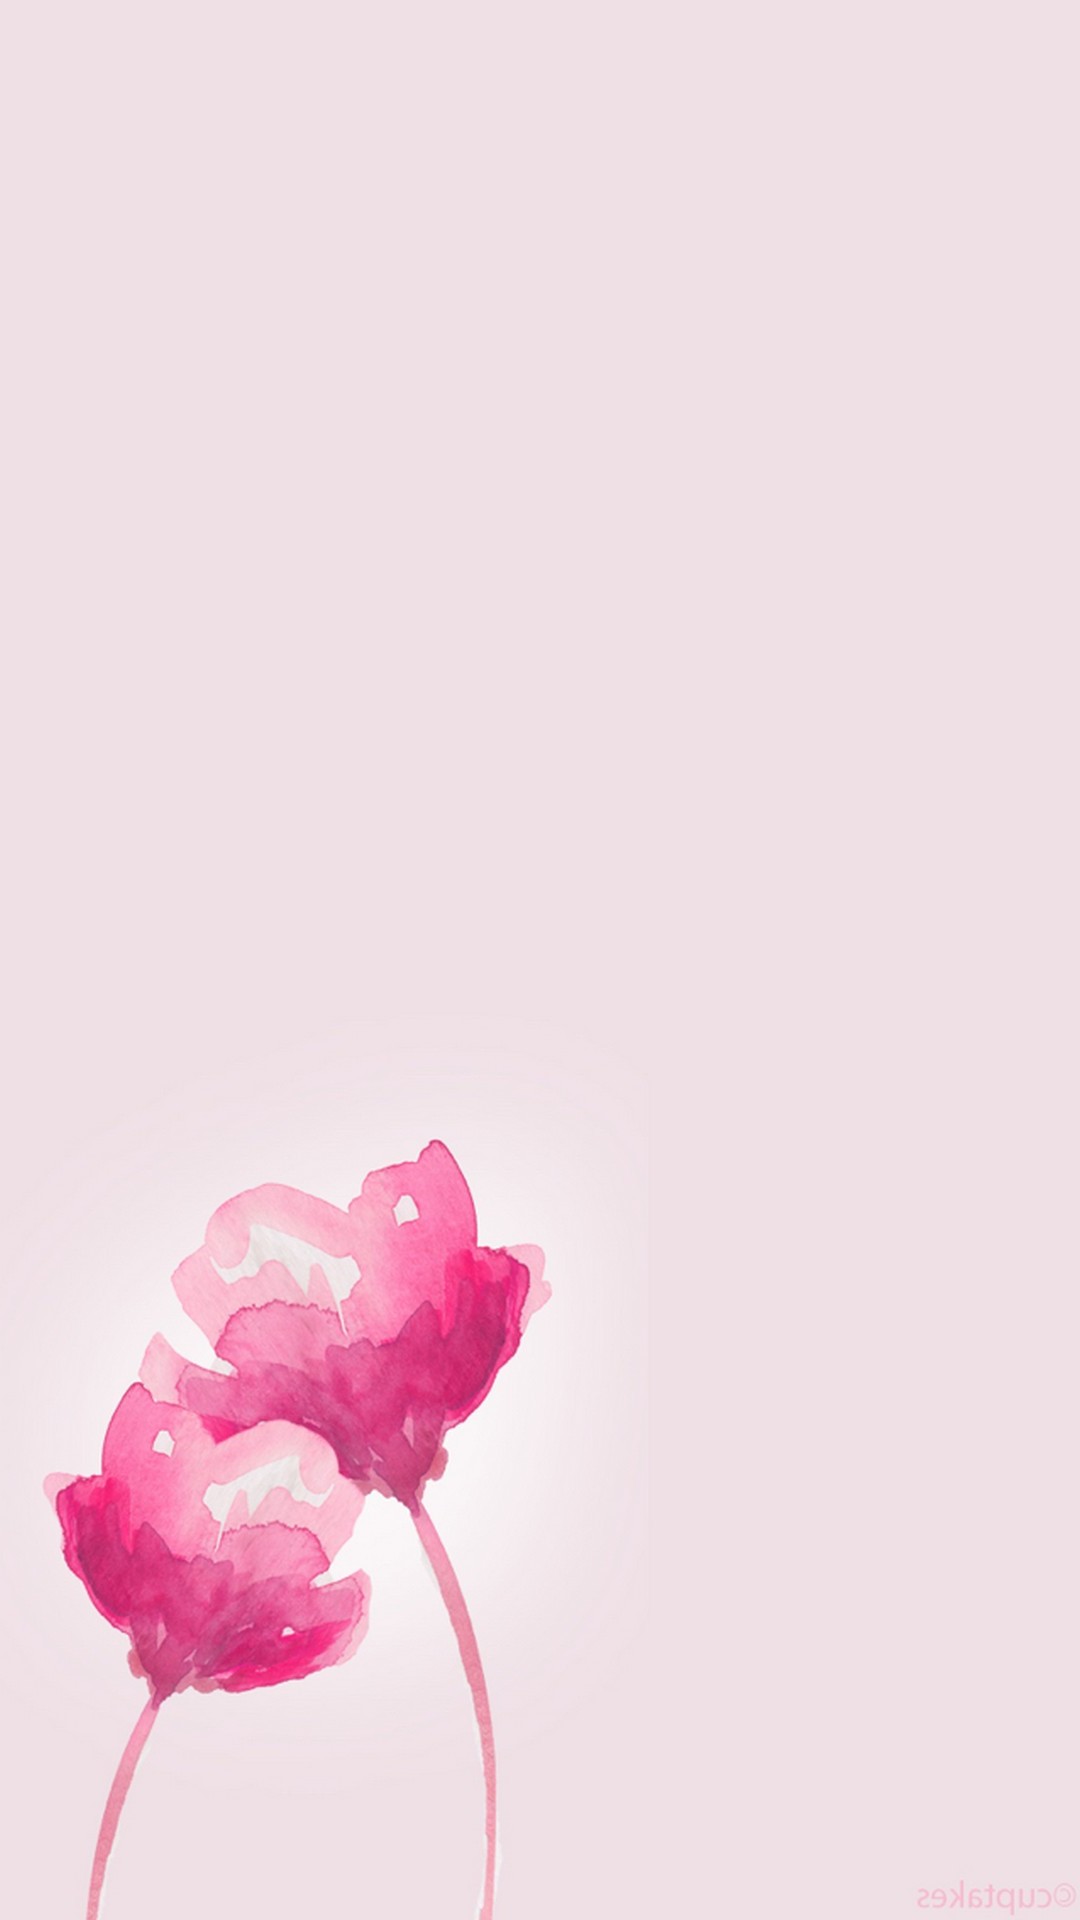 Animated Pink Flower Wallpaper